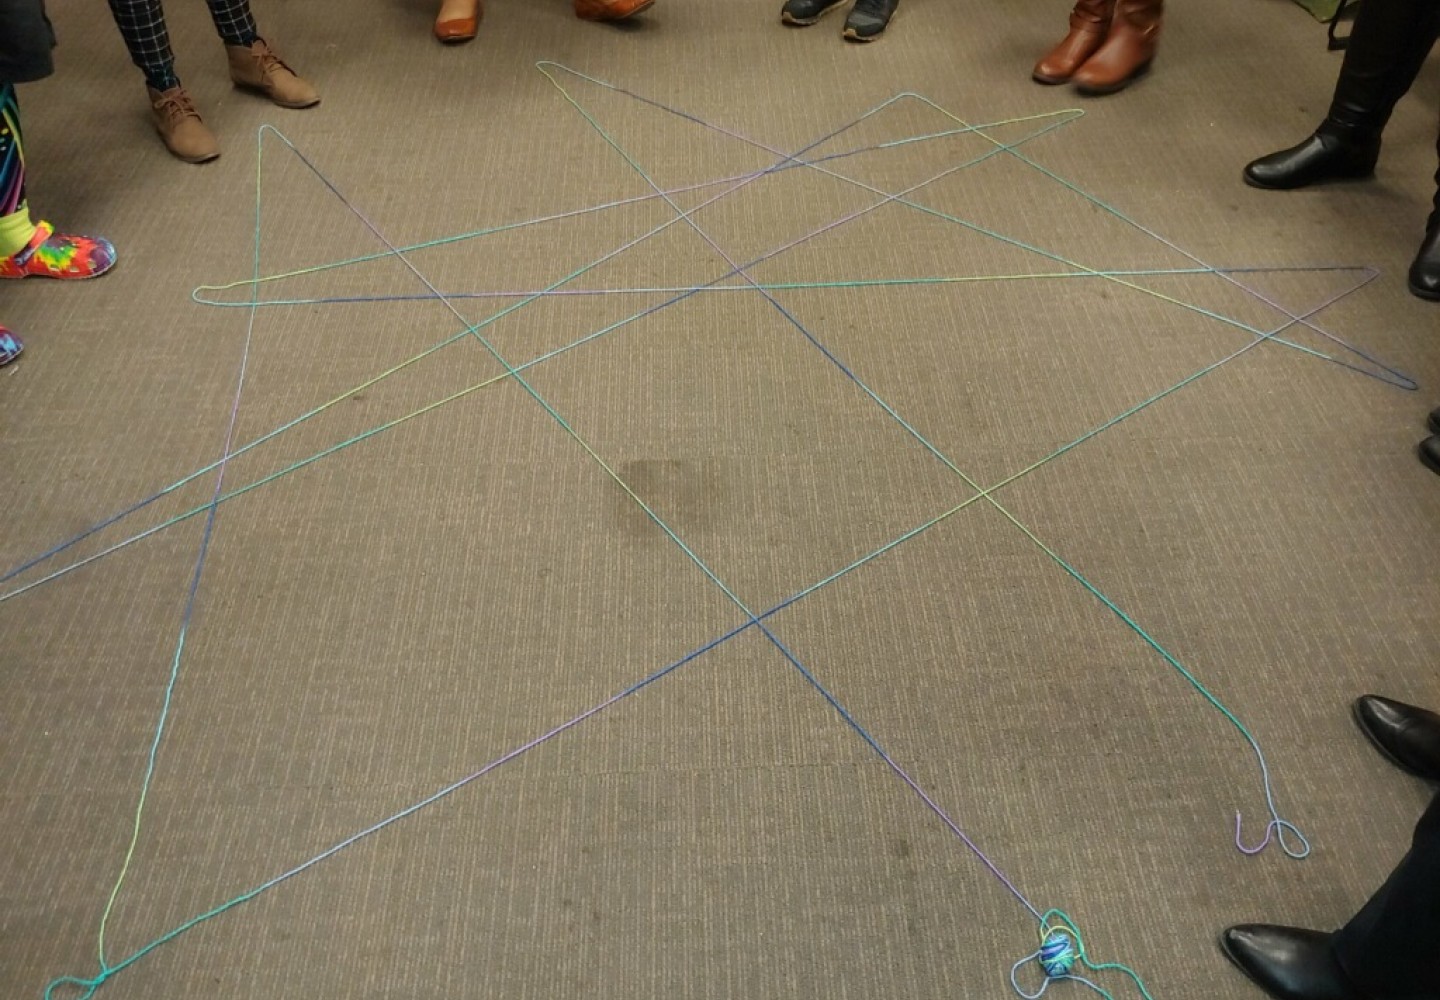 Weavers of Equity web of connection activity